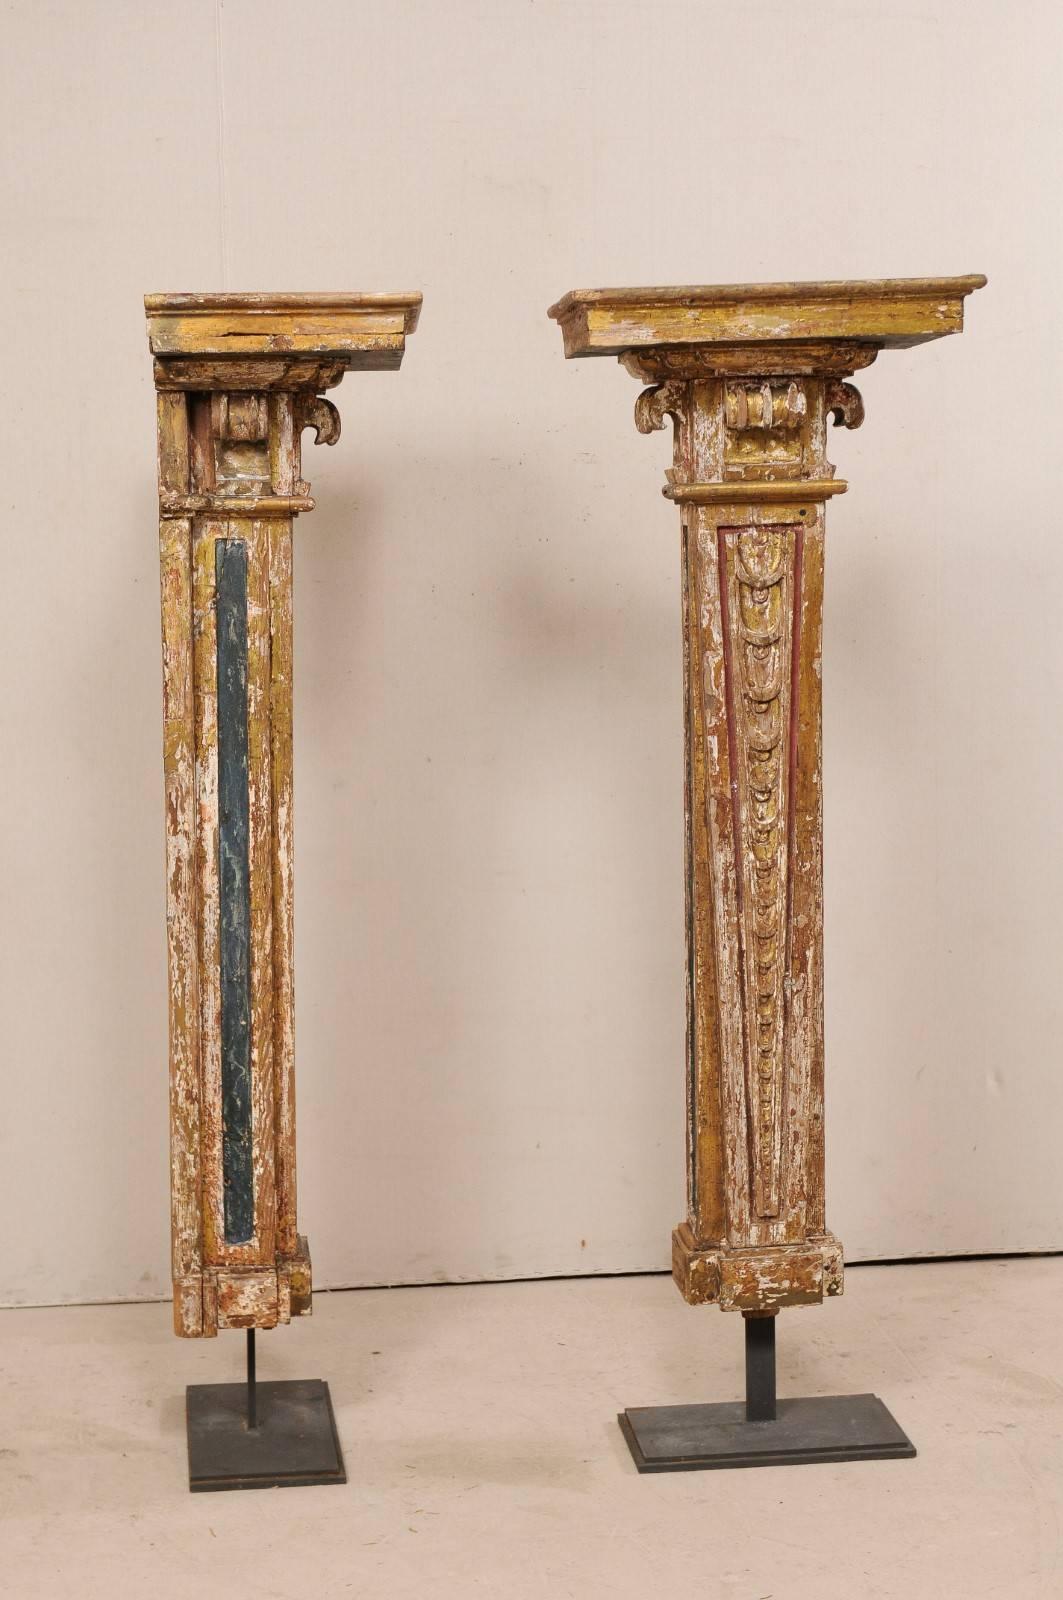 Carved Early 18th Century Italian Pair Exquisite Columns on Custom Stands, 6 Ft. Tall